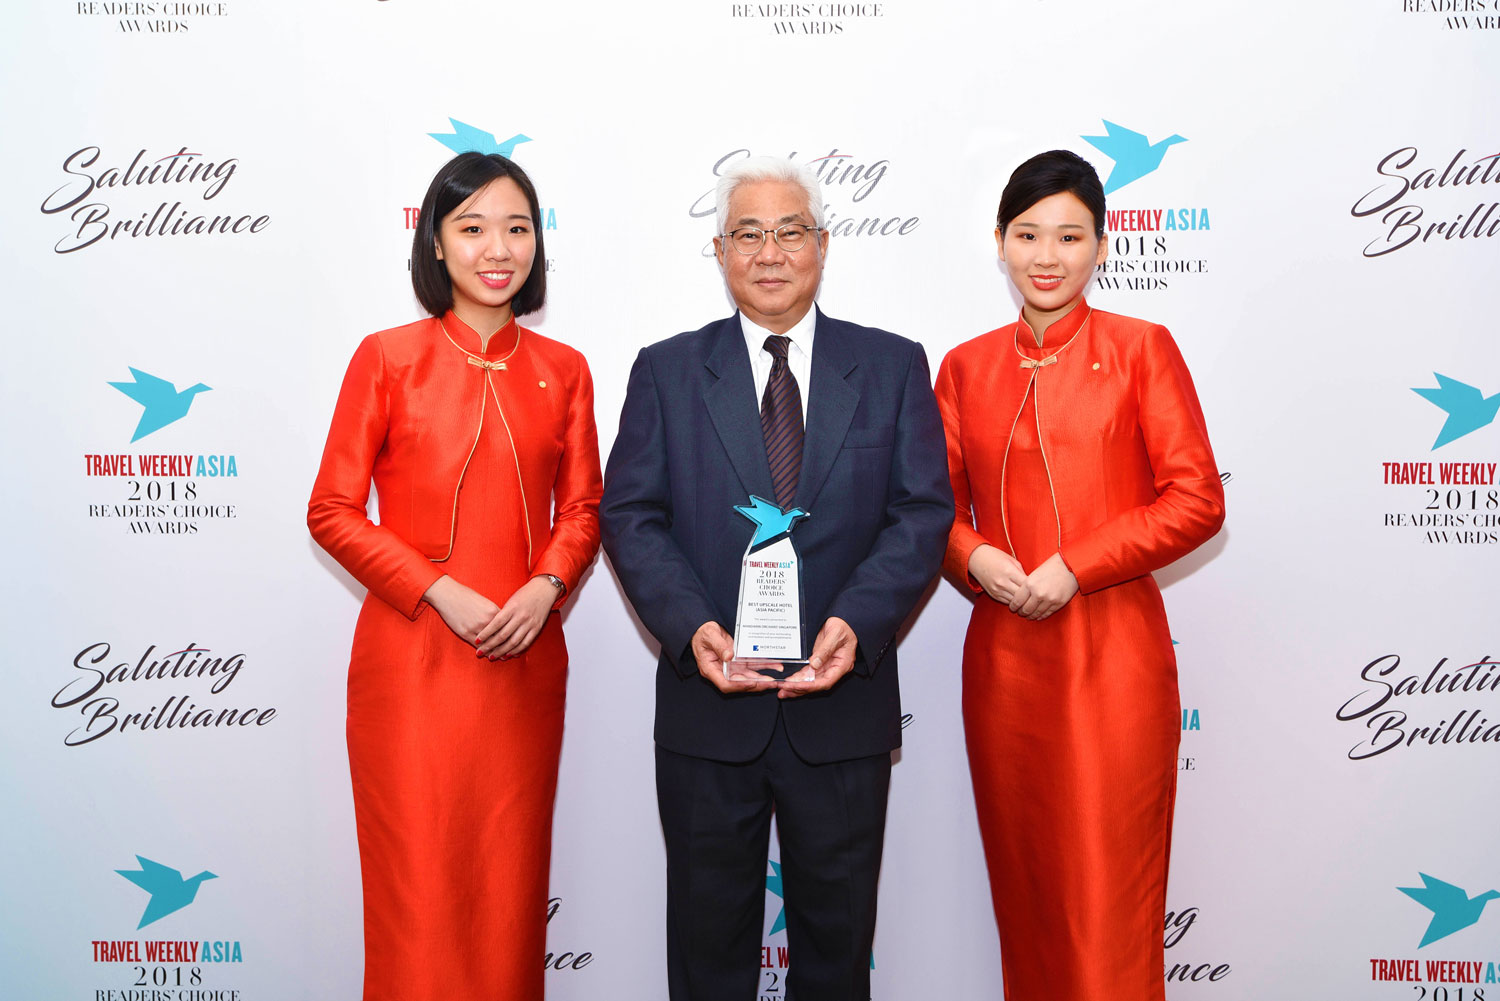 Mr Tan Kim Seng, Chief Operating Officer, Meritus Hotels & Resorts, receiving the Best Upscale Hotel -- Asia Pacific award on behalf of Mandarin Orchard Singapore at the Travel Weekly Asia 2018 Readers’ Choice Awards.